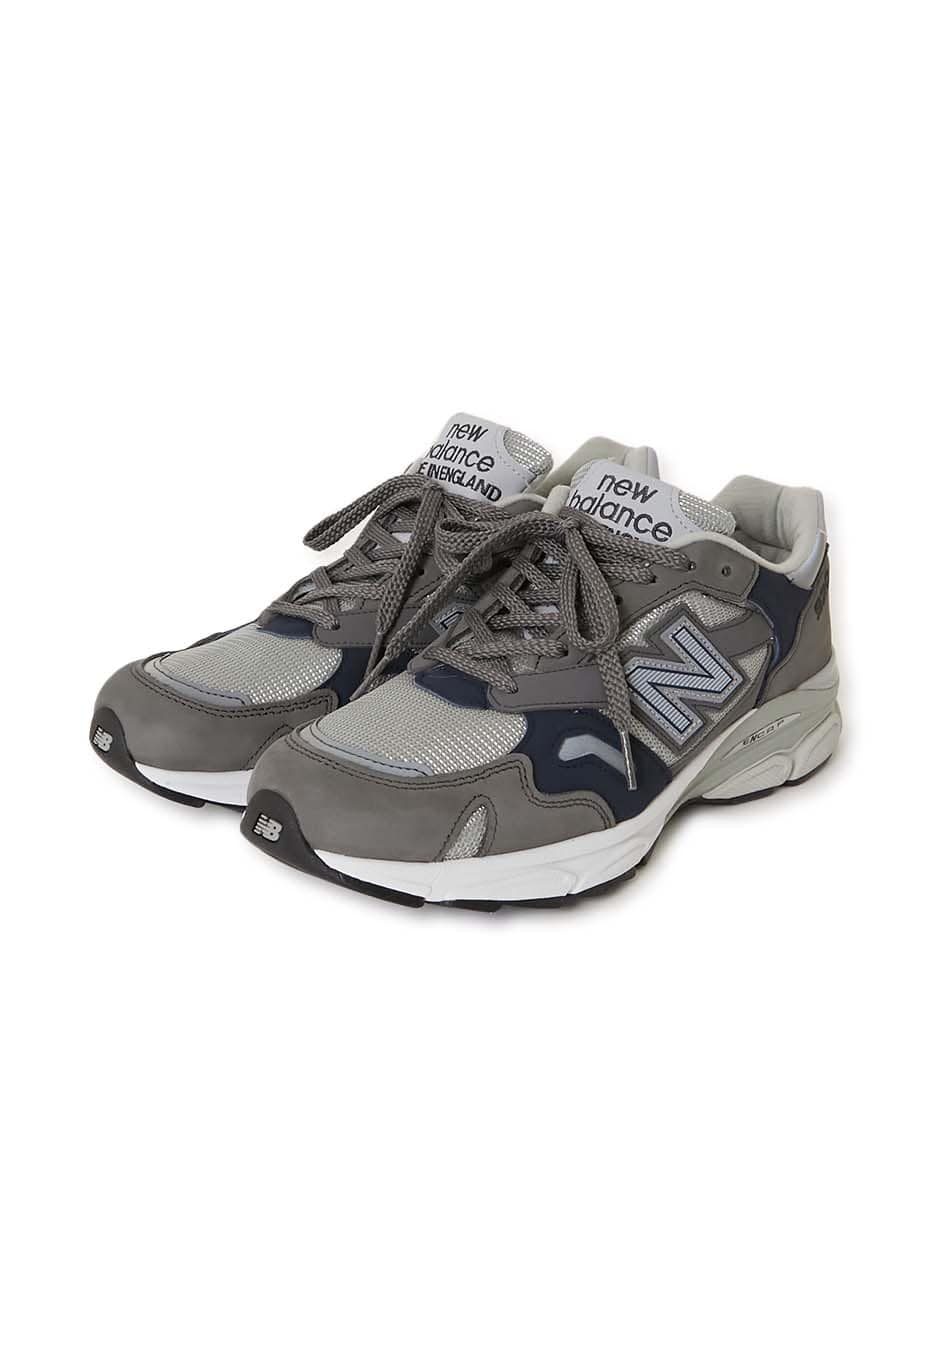 NEW BALANCE M920 GNS MADE IN UK SHOES